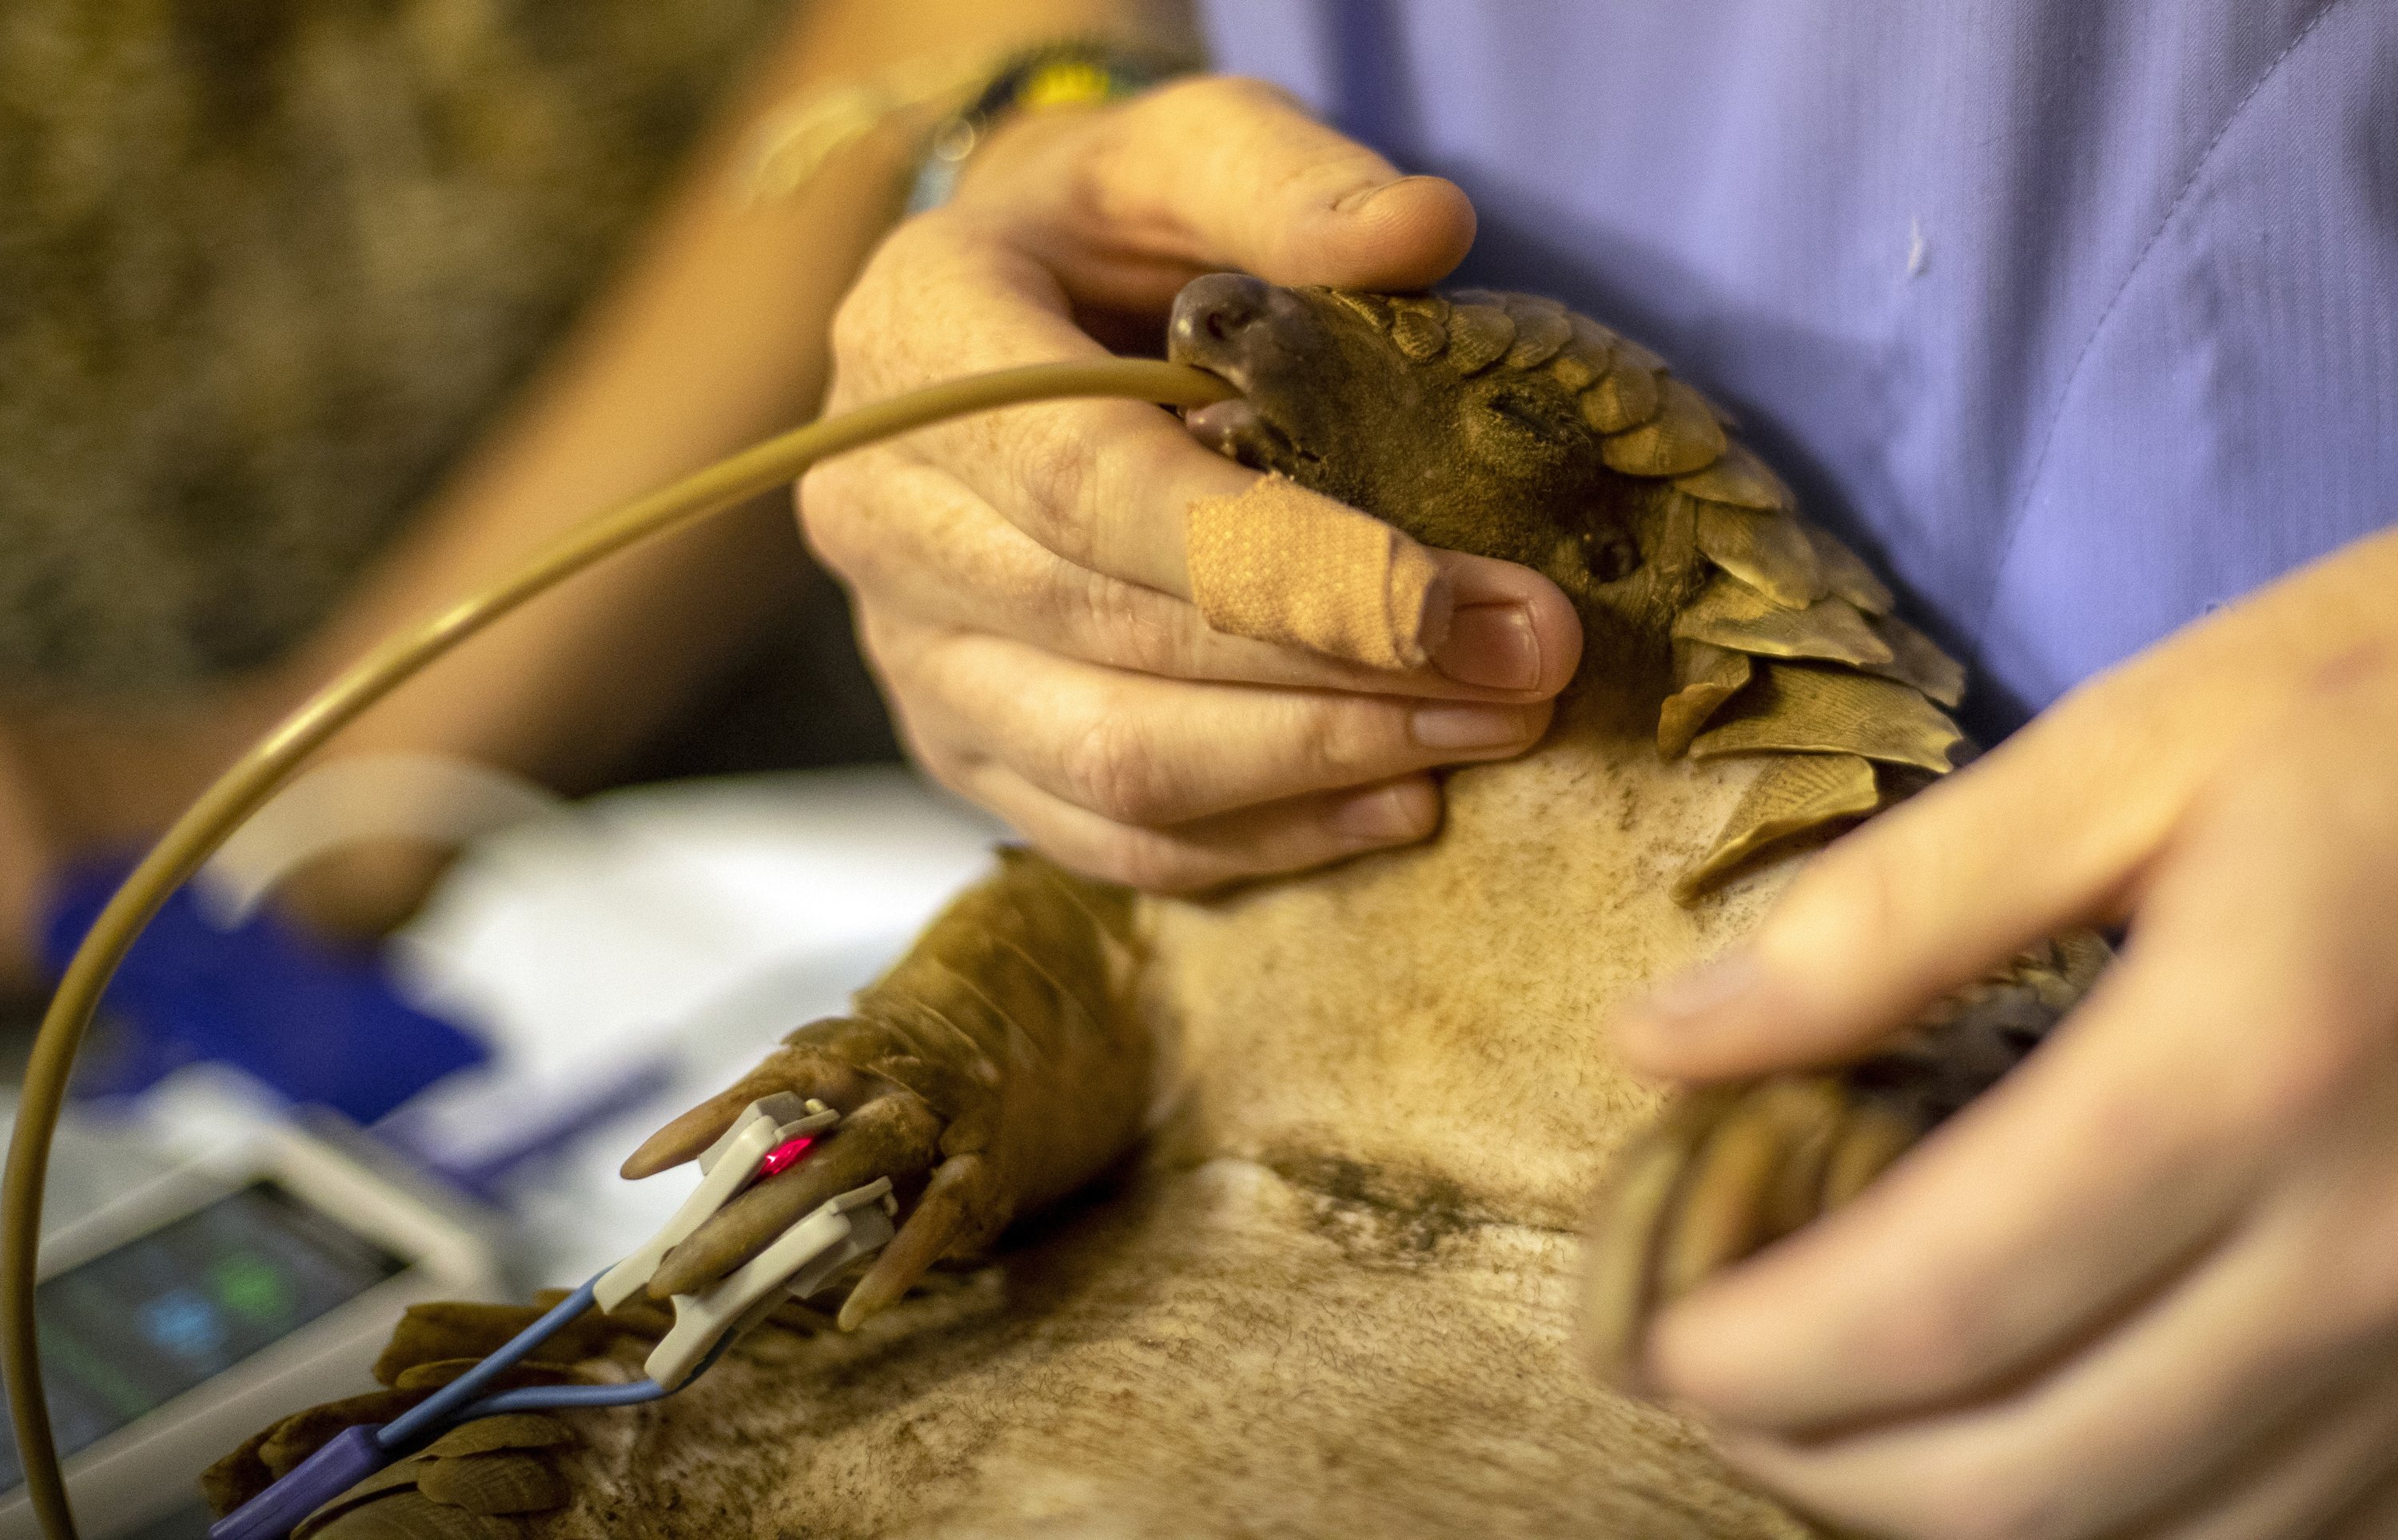 Veterinary nurse, Alicia Abbott, of the African Pangolin Working Group in South Africa tube-feeds a pangolin, at a Wildlife Veterinary Hospital in Johannesburg, South Africa, Sunday, Oct. 18, 2020. (AP Photo)